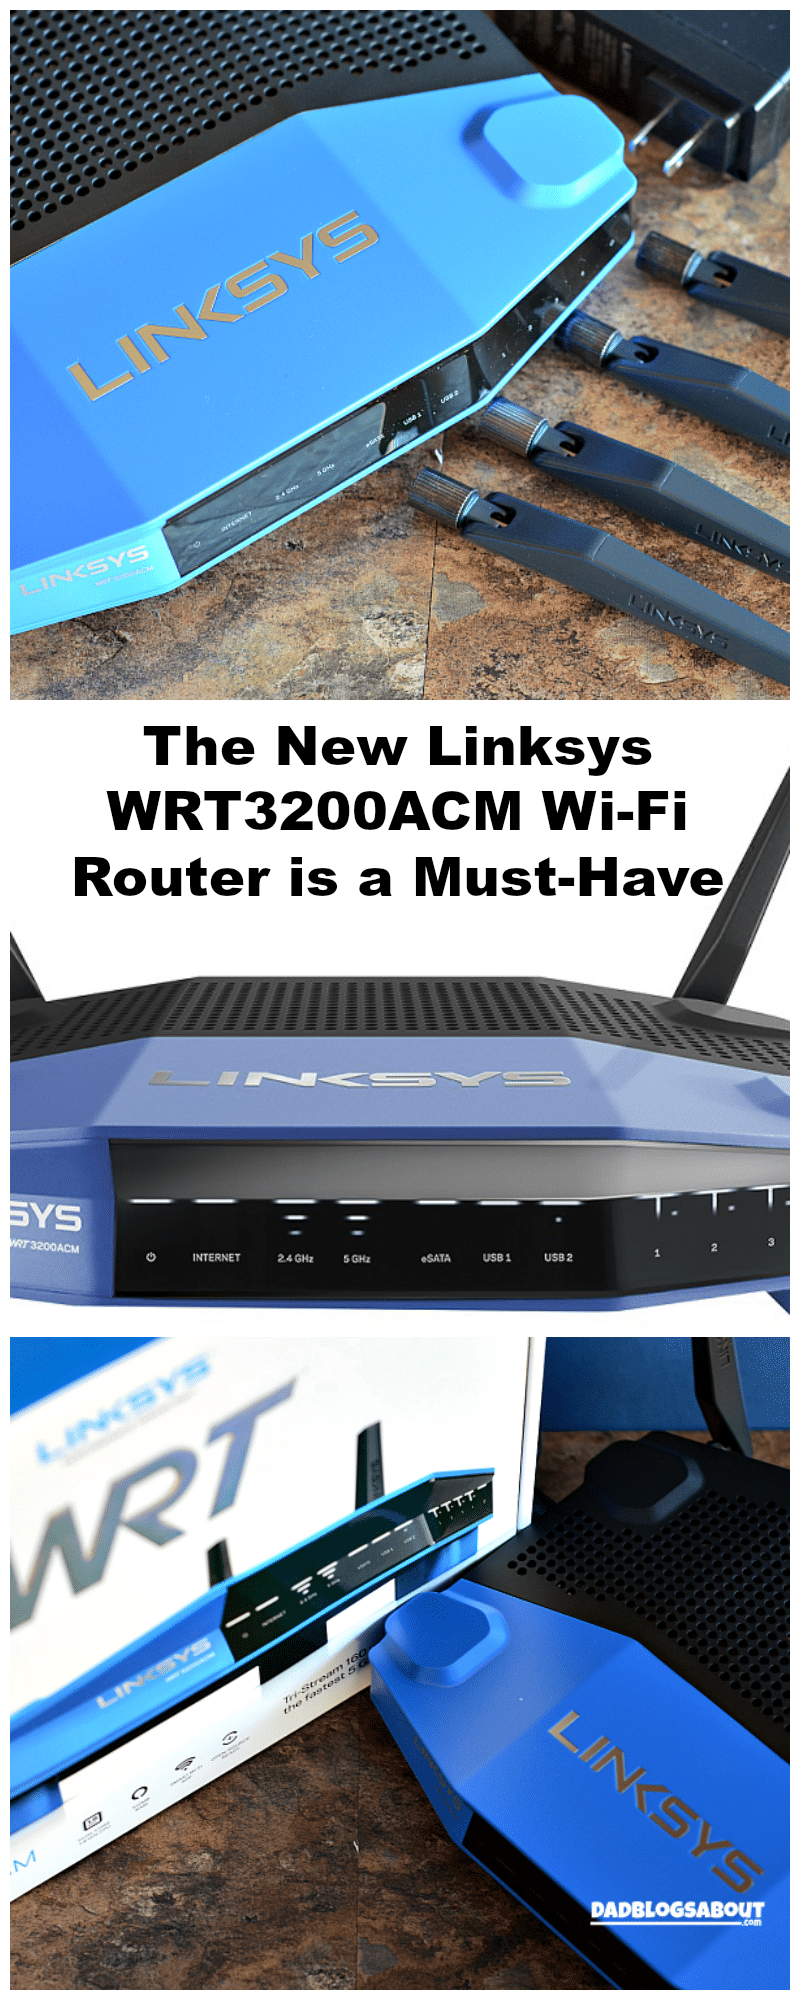 The New Linksys WRT3200ACM Wi-Fi Router is a Must-Have. Learn more at DadBlogsAbout.com